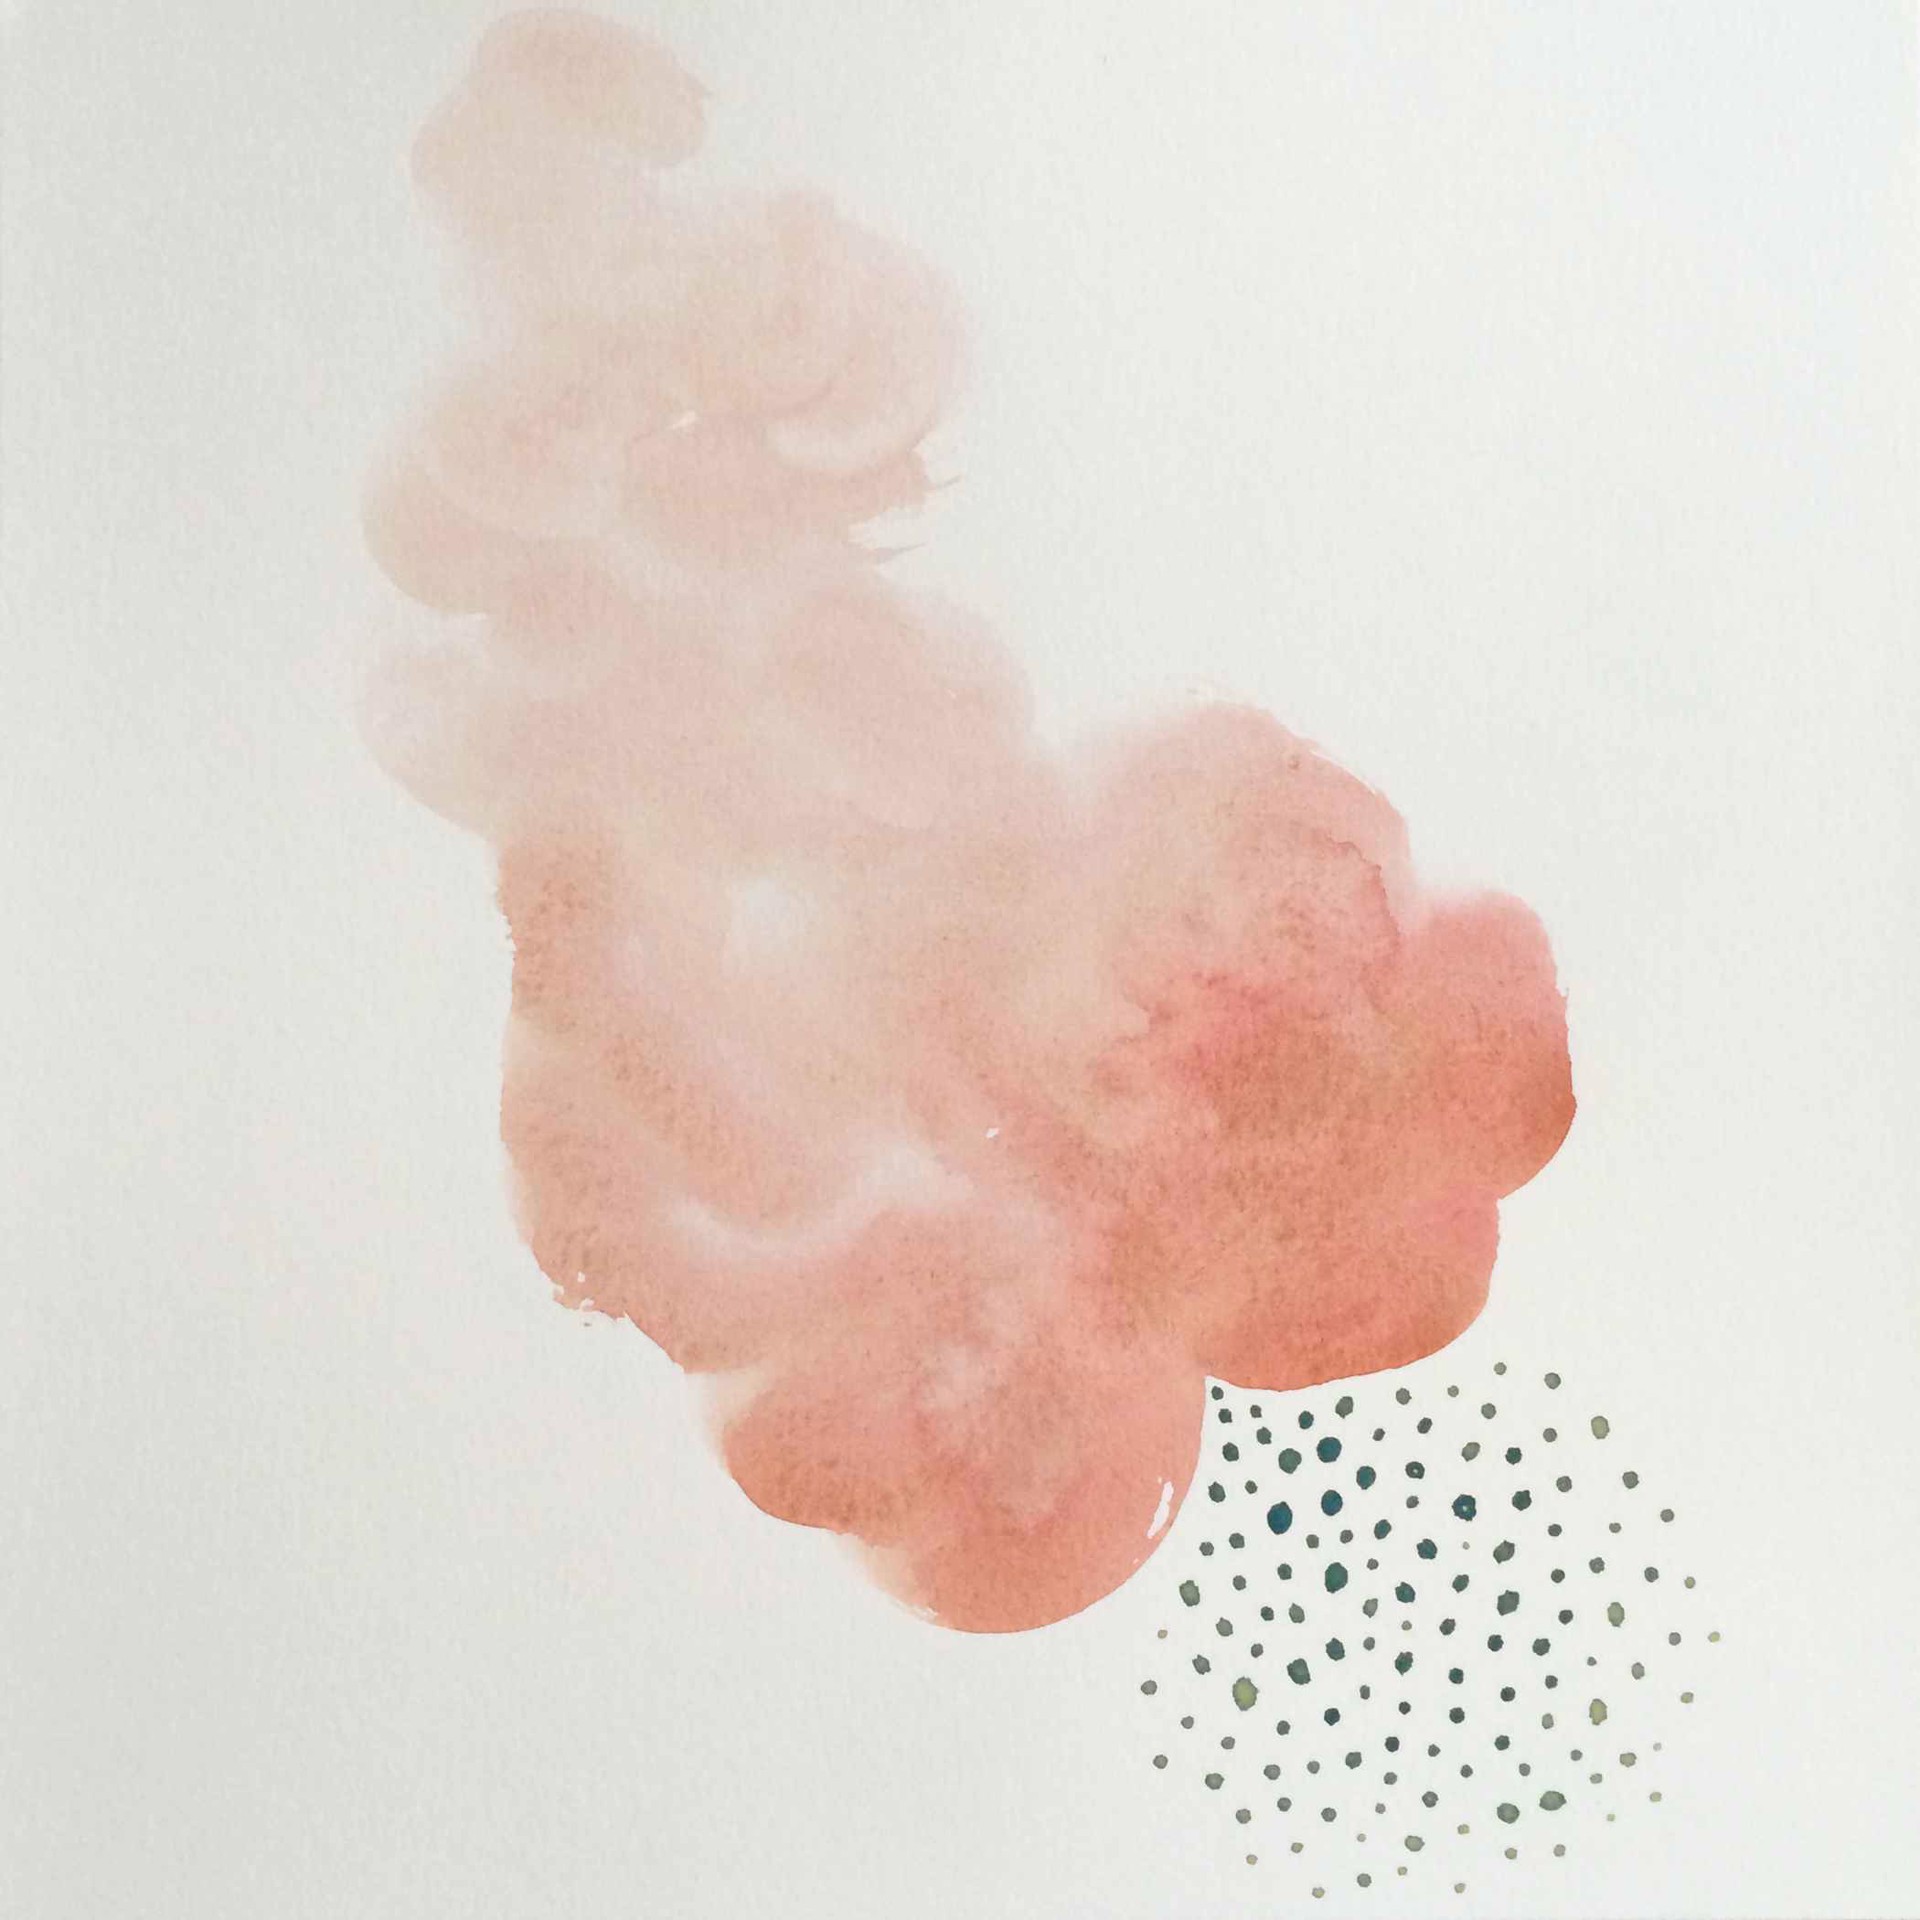 Untitled (Watercolor XIII) by Shawn Hall